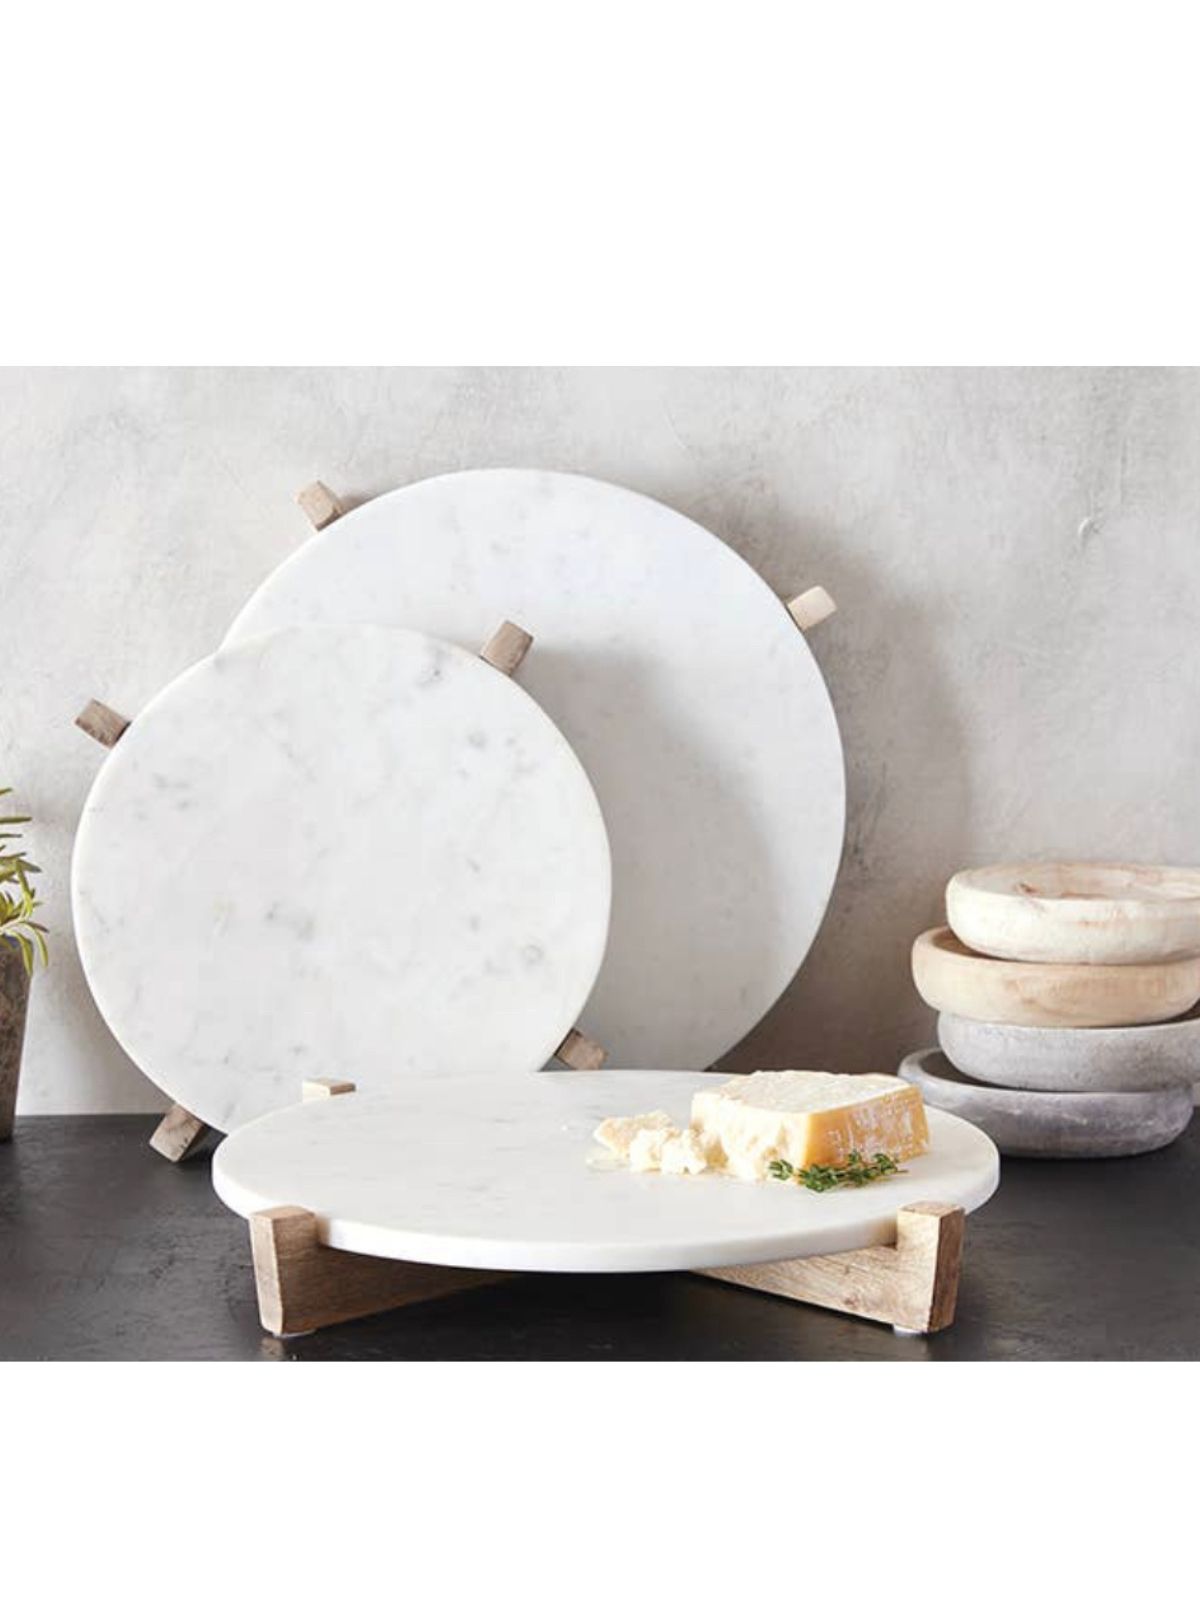 White Marble Serving Tray on Mango Wood Pedestal, Available in different Shapes.